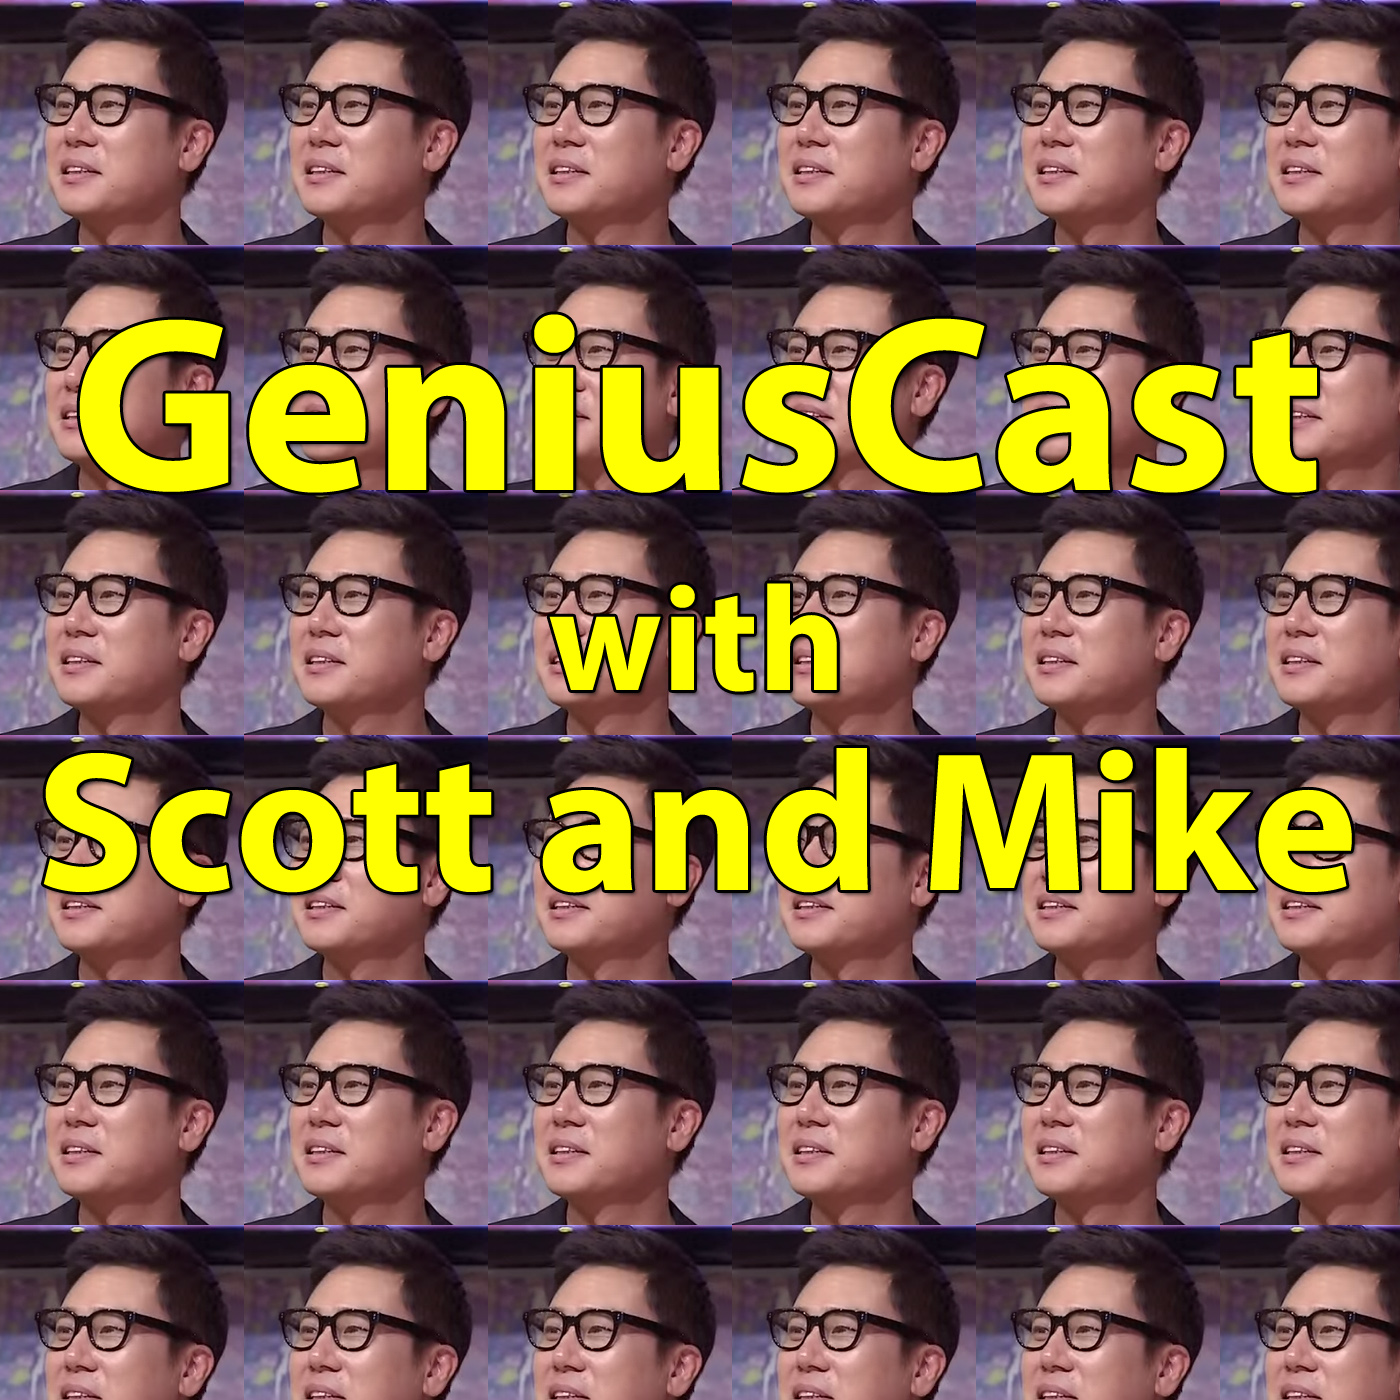 GeniusCast S4E3 - GeniusCast with Scott and Mike